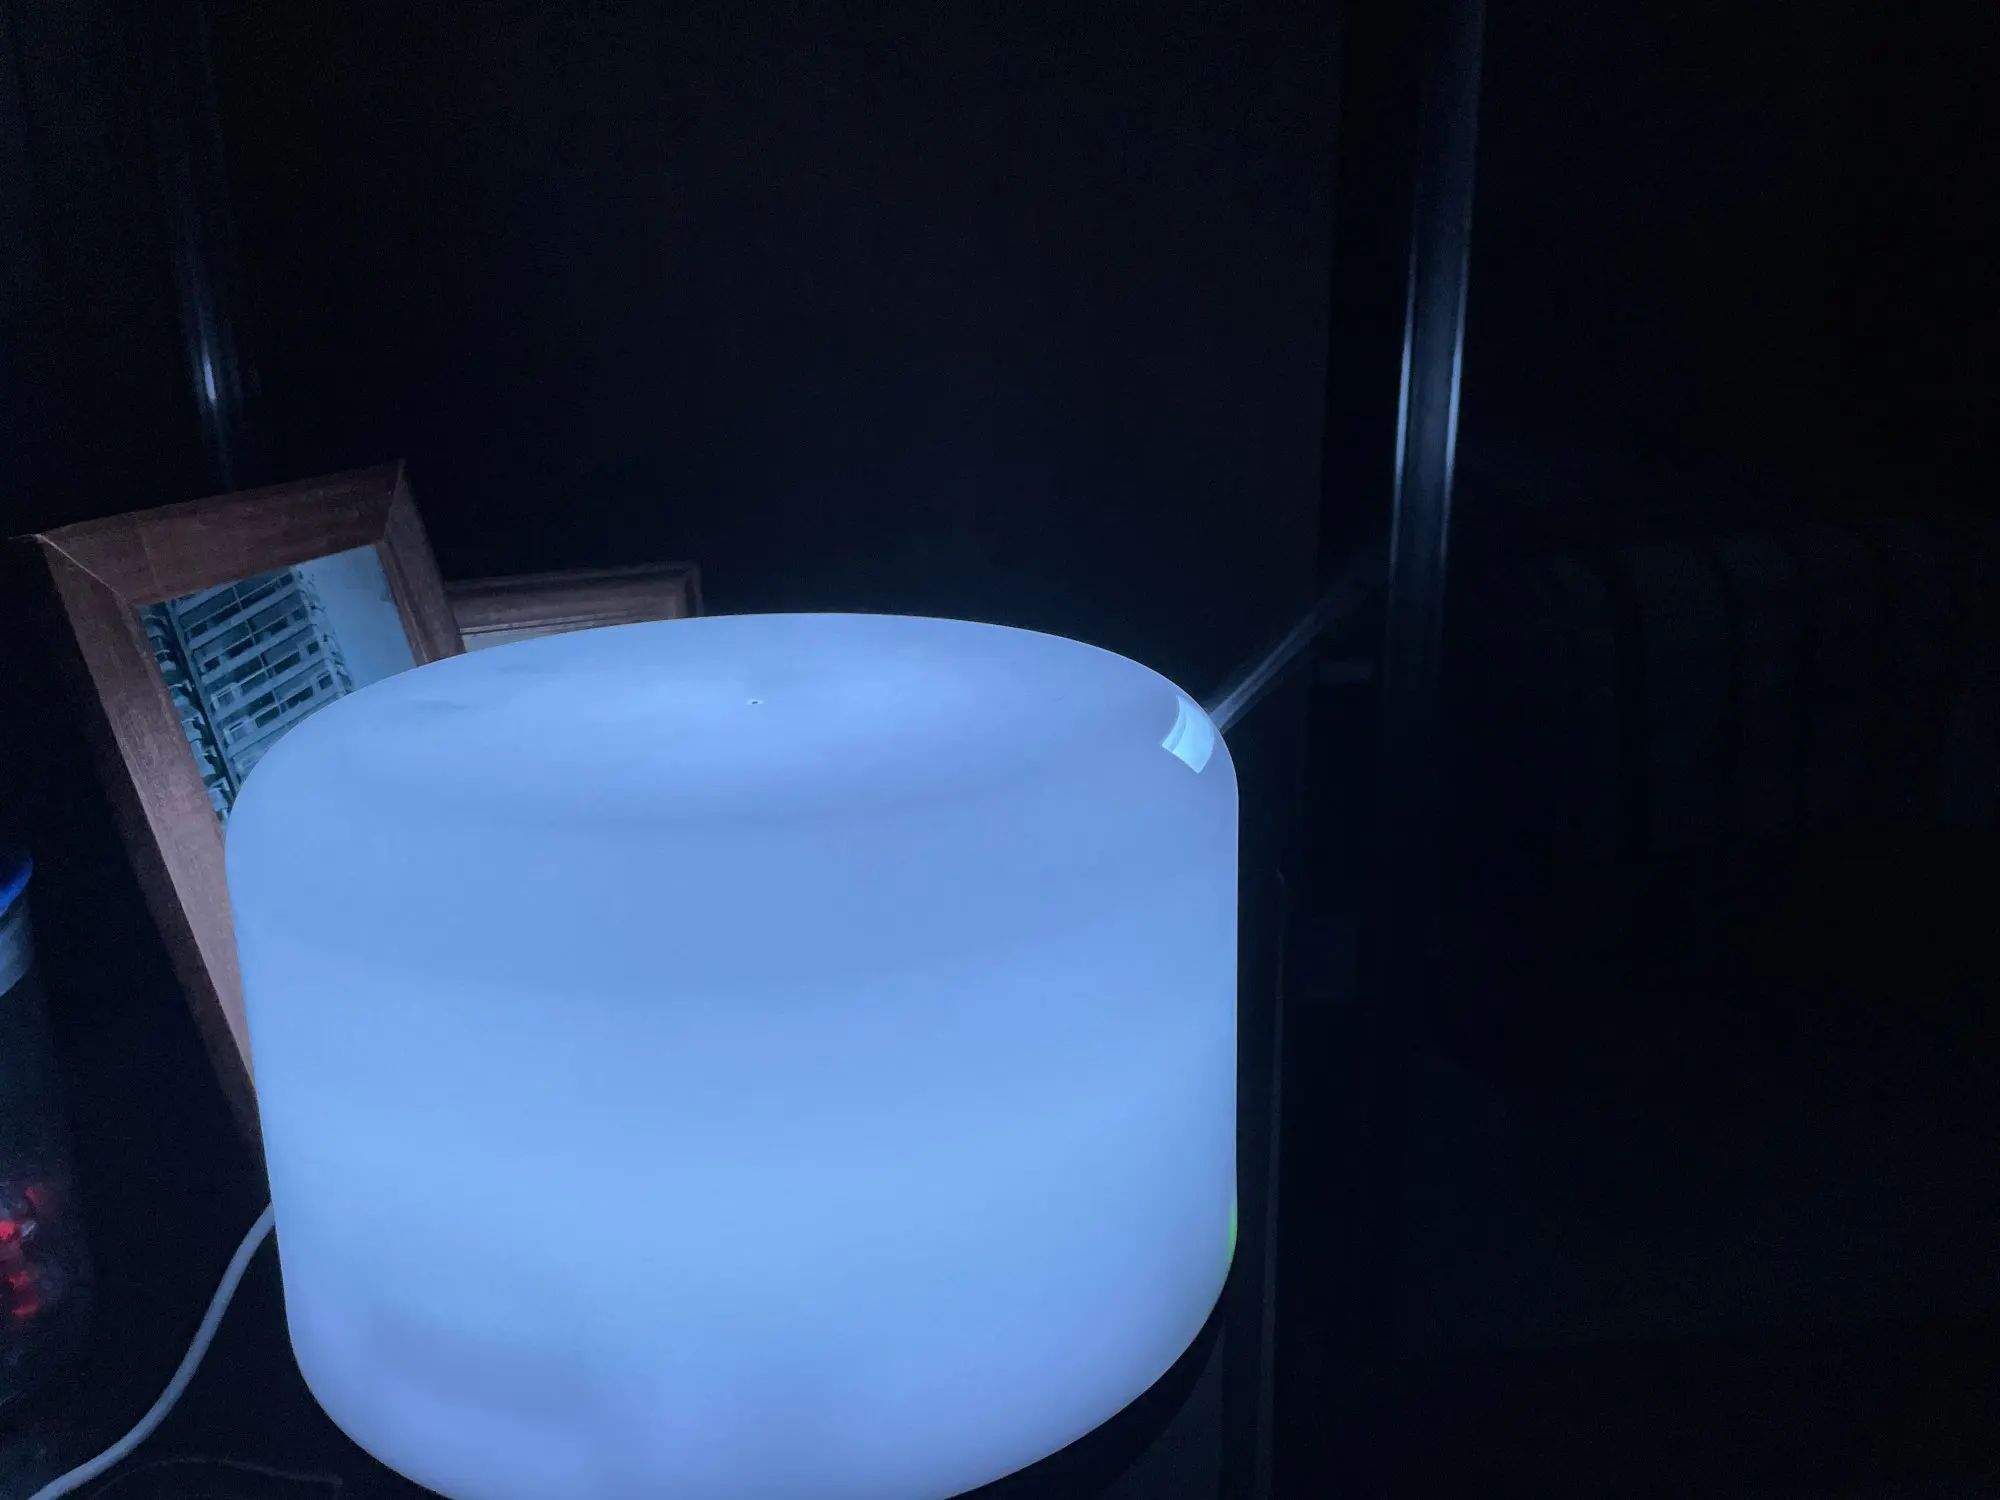 Electric Aroma Diffuser Air Humidifier photo review